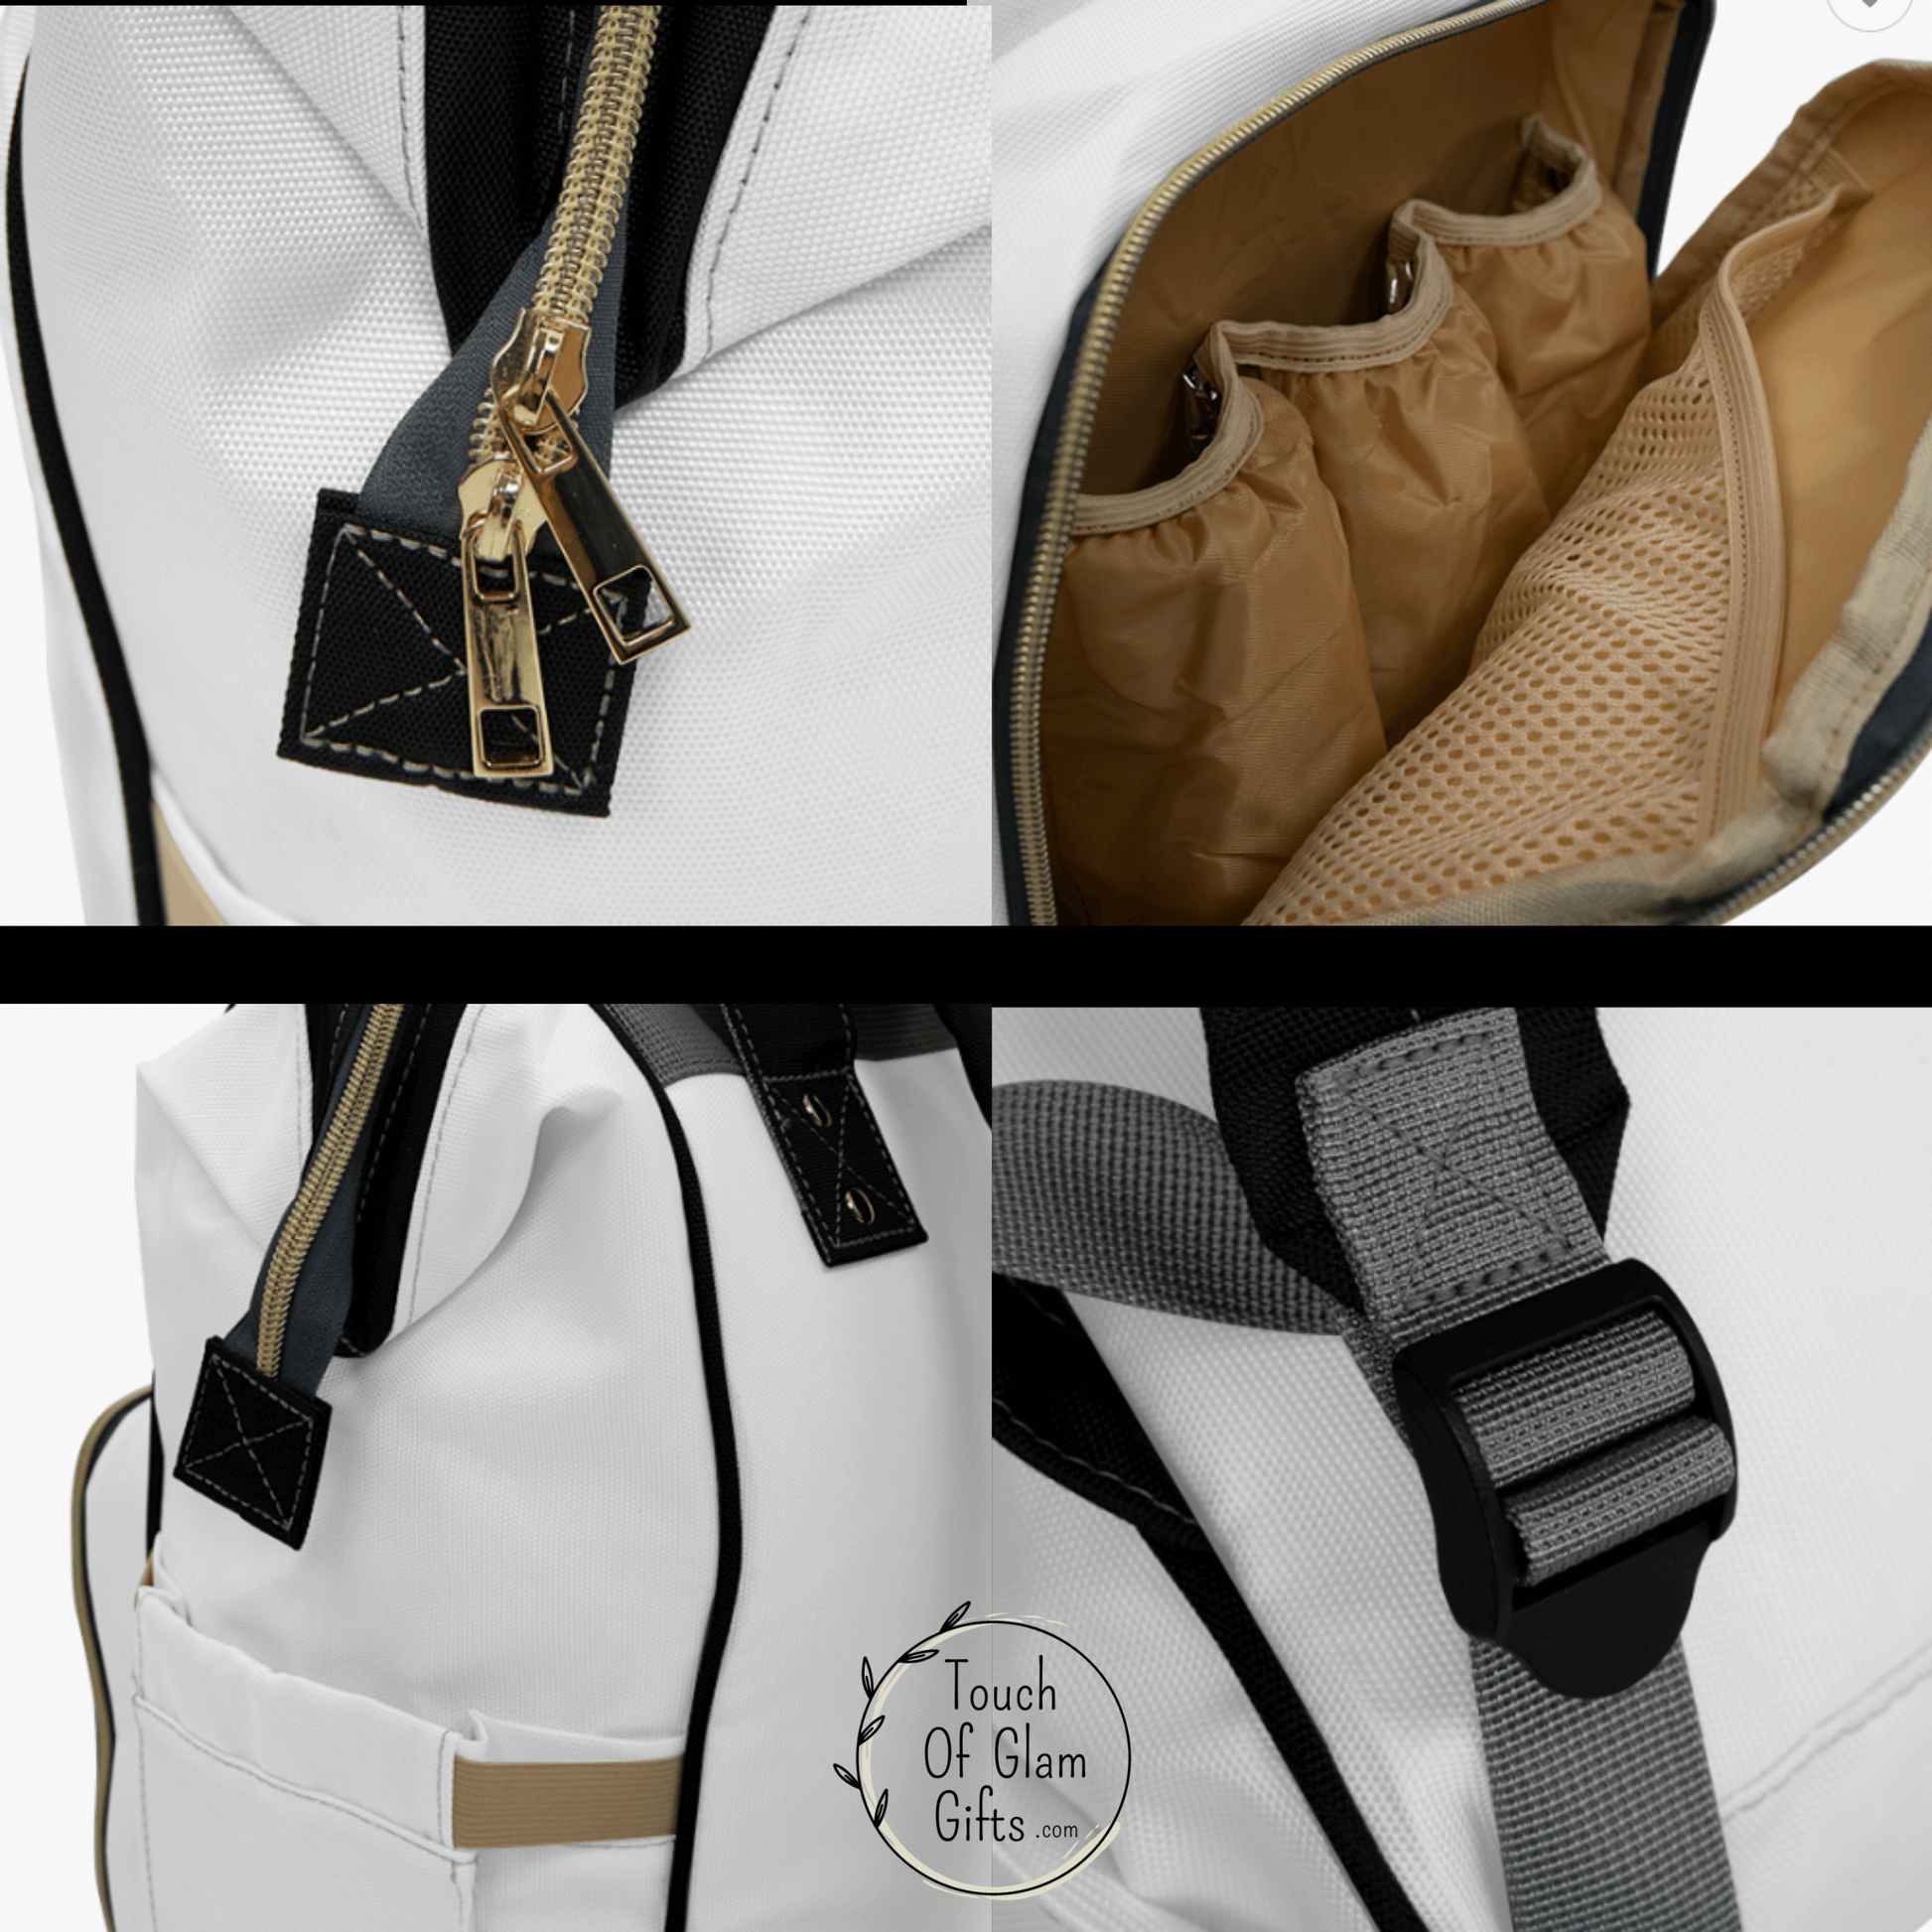 up close look at the gold zipper with 2 heads and the outer zippered compartments with four pockets and the adjustable strap in gray for the padded shoulder straps for the backpack.